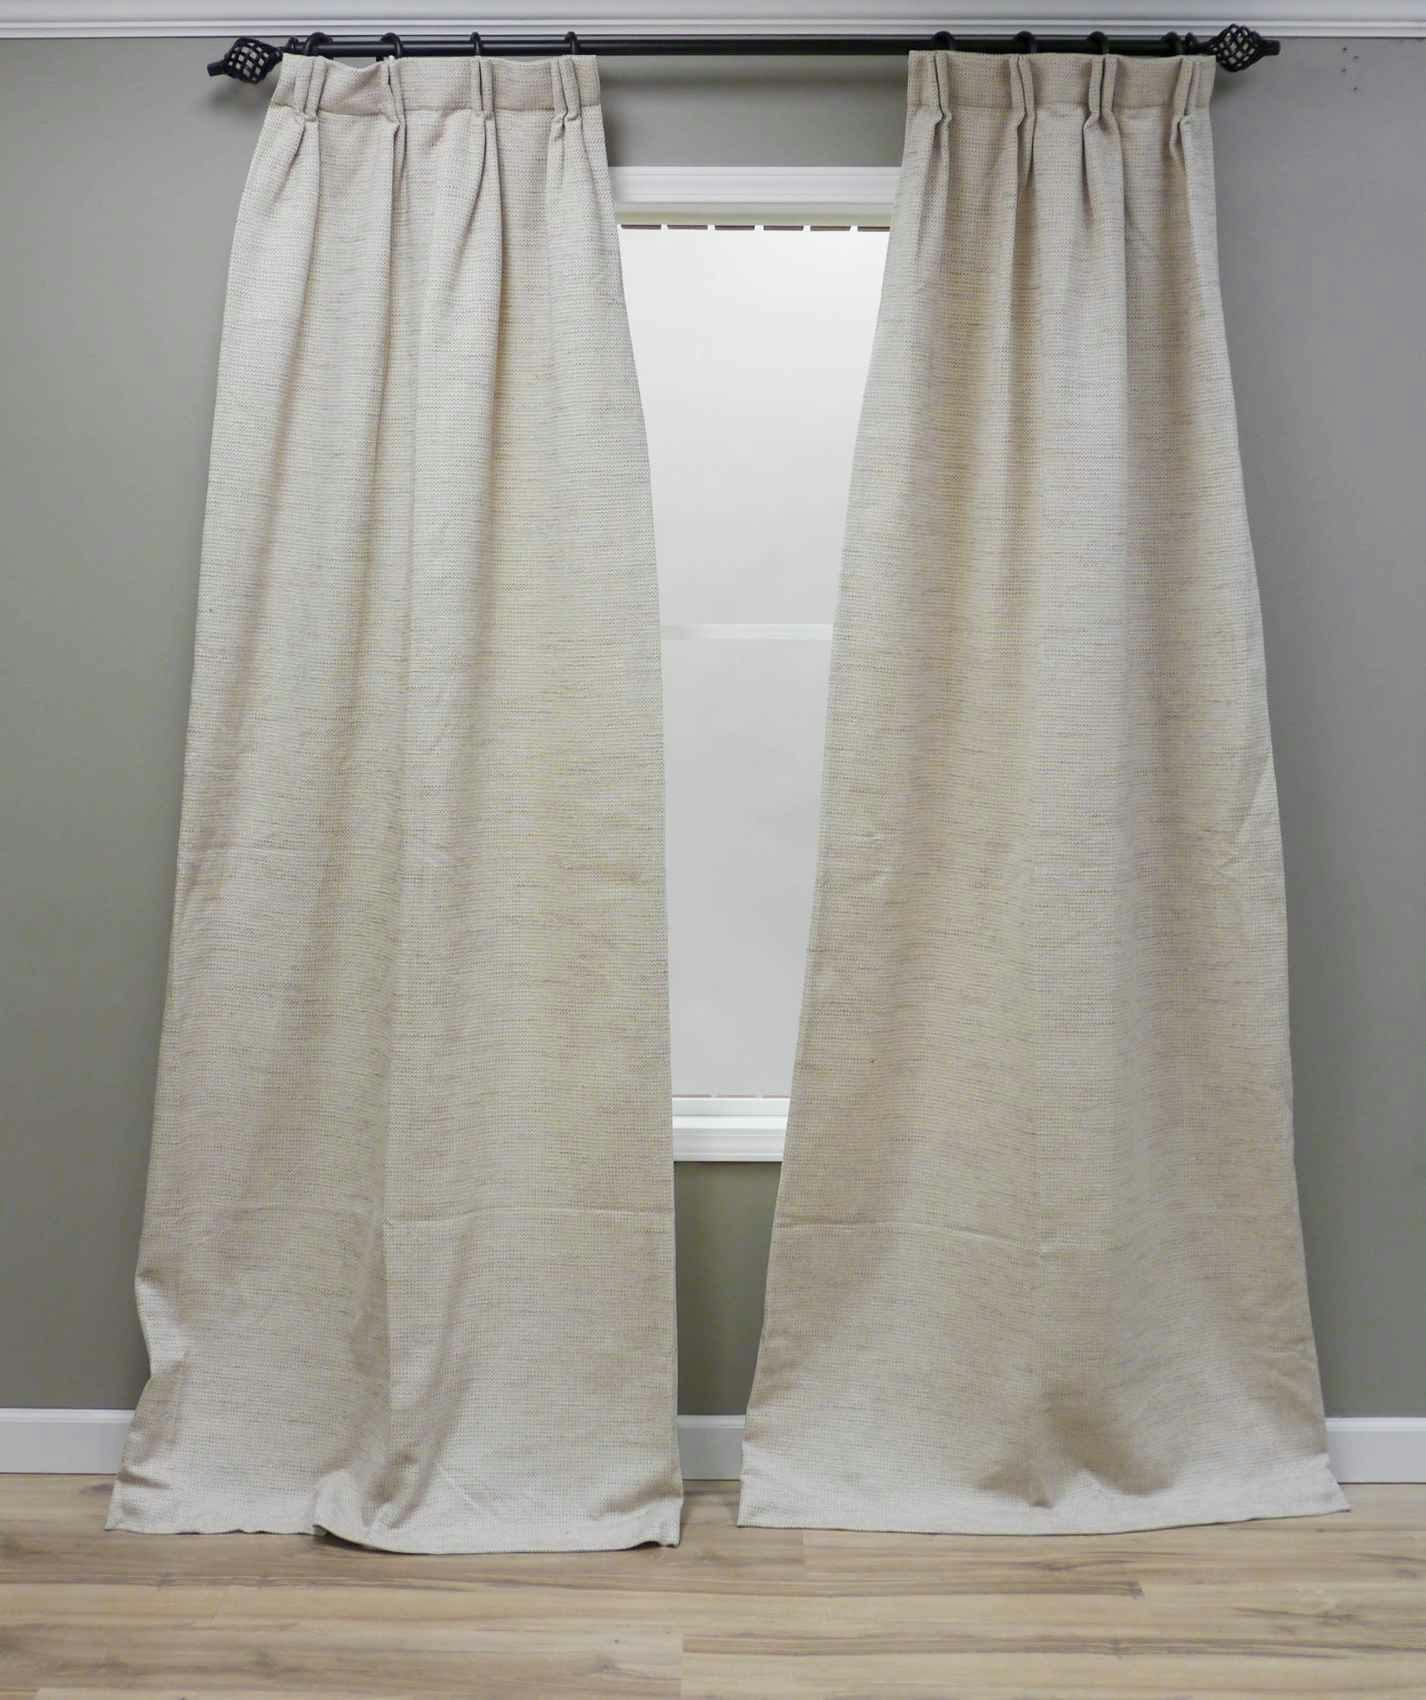 One Curtain Mistake People Make | The Blog